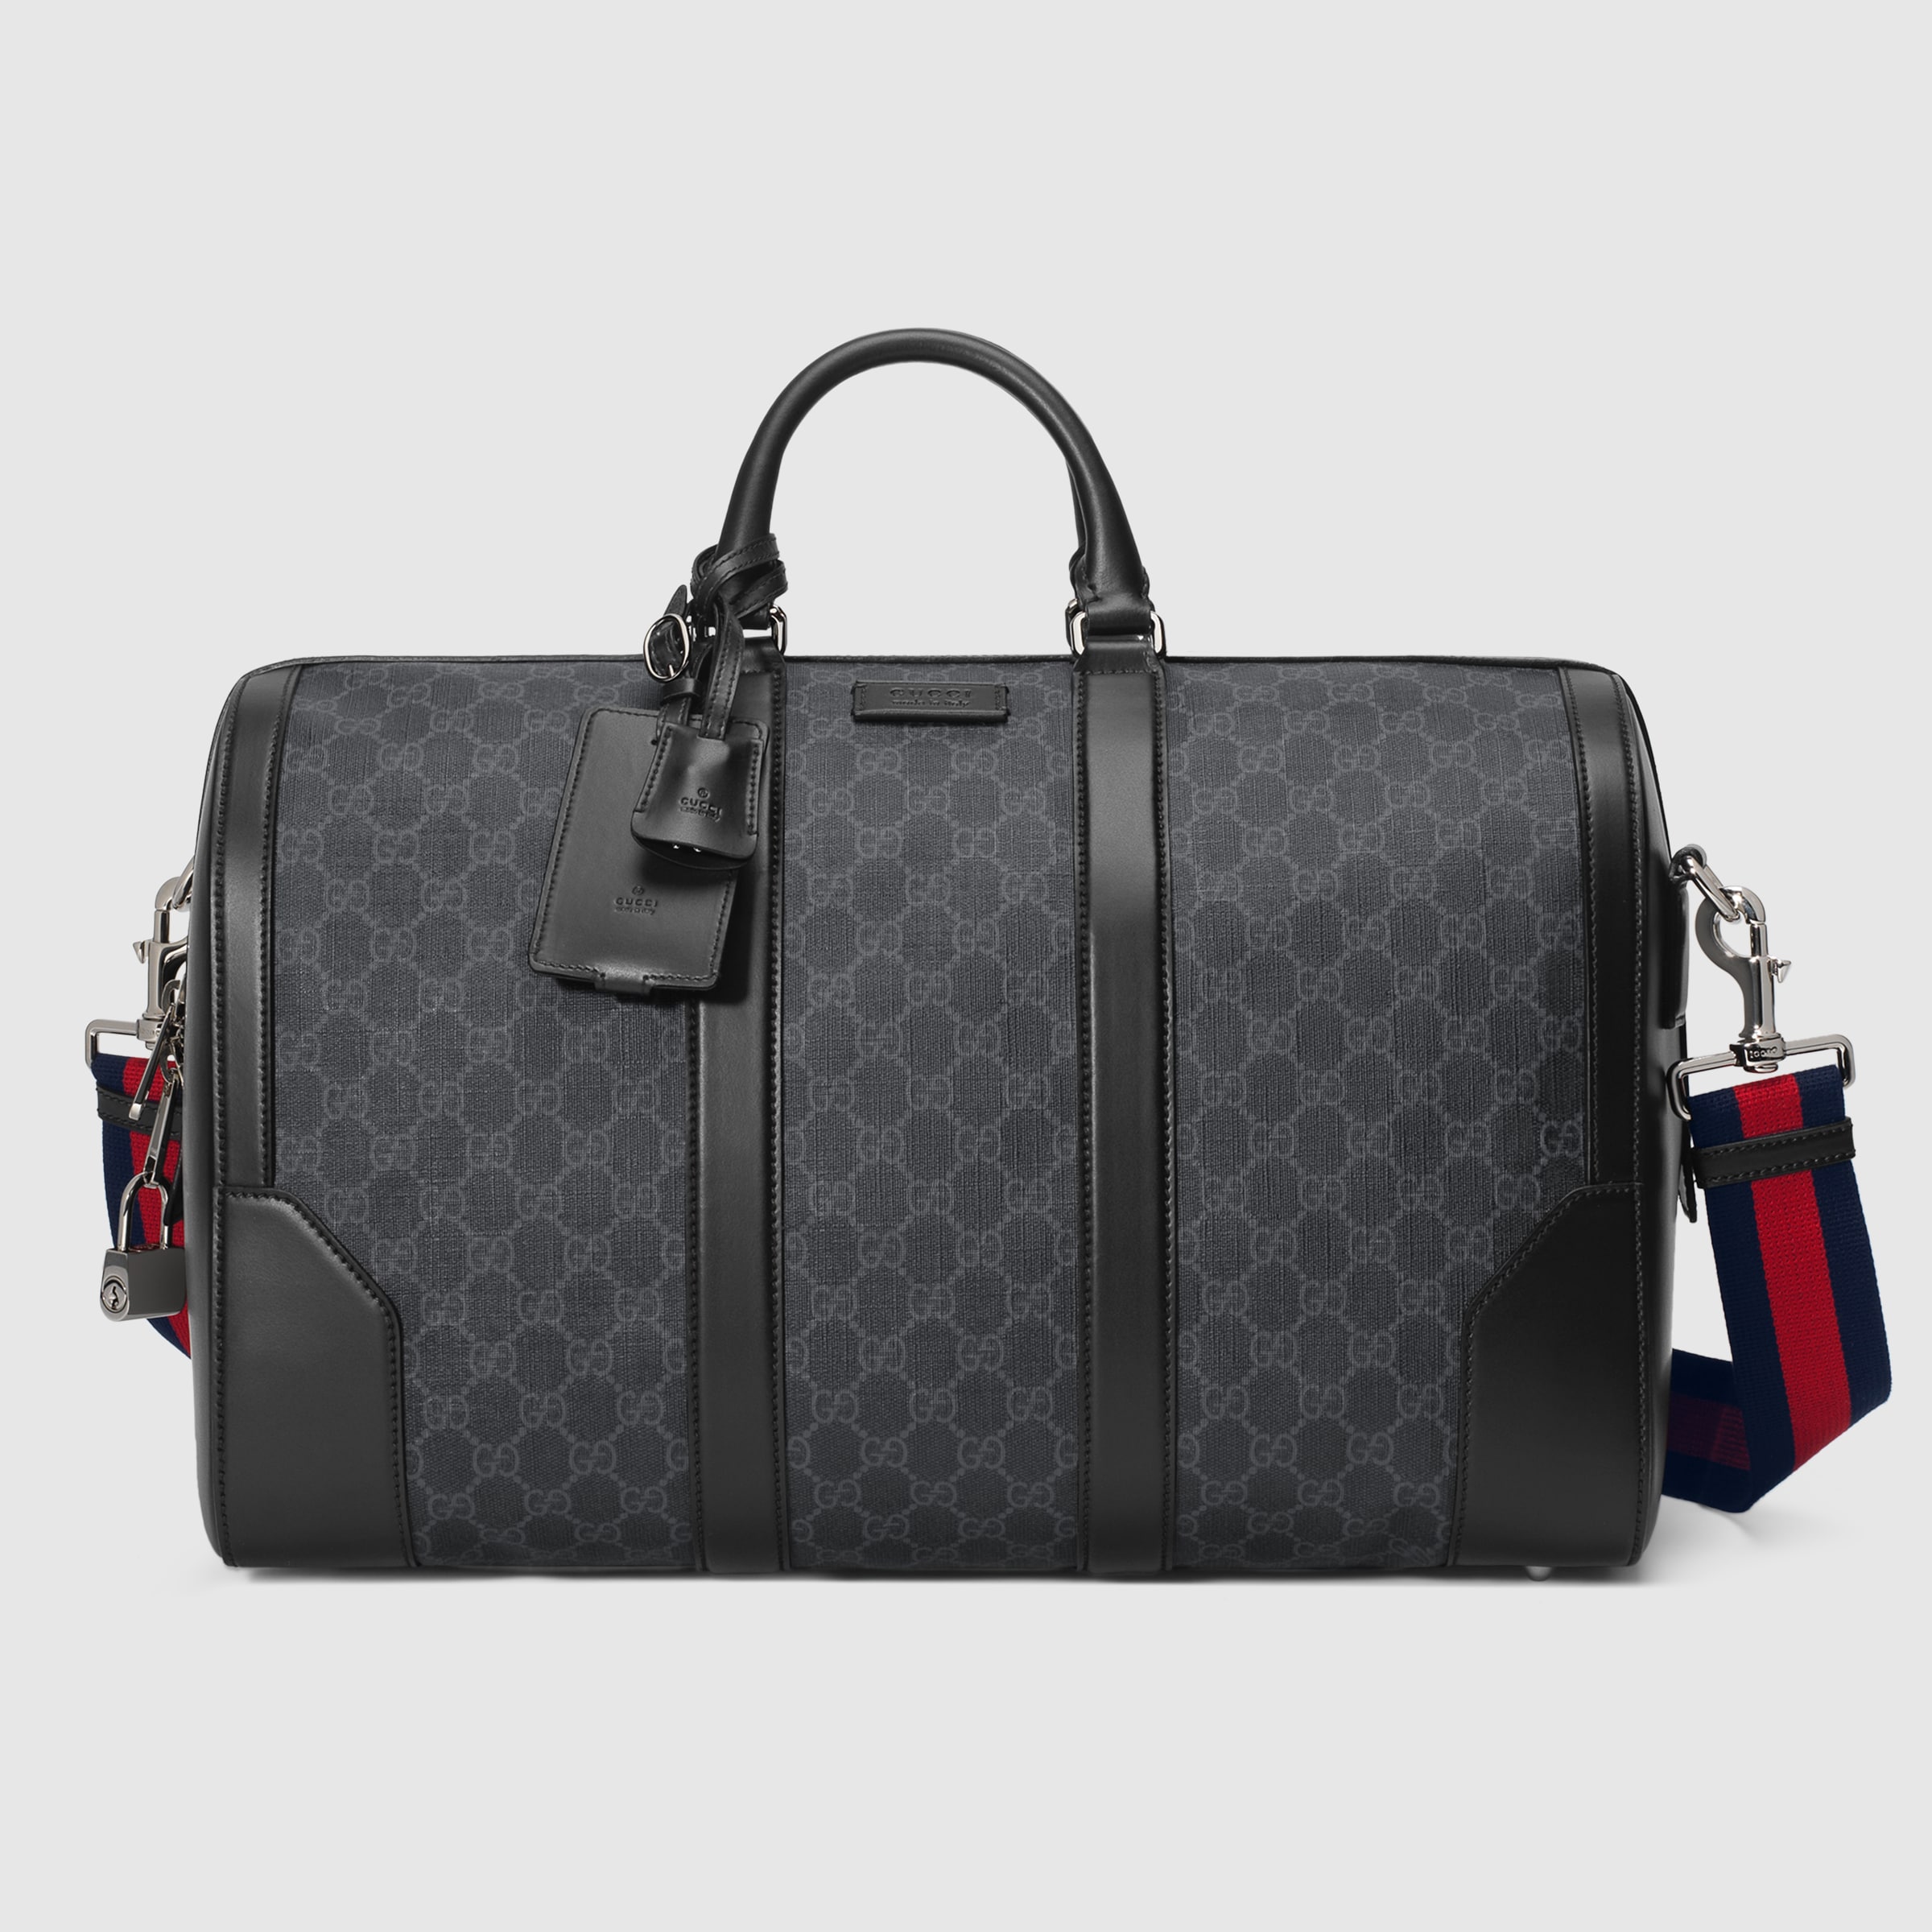 Gg black carry-on gucci duffle bag